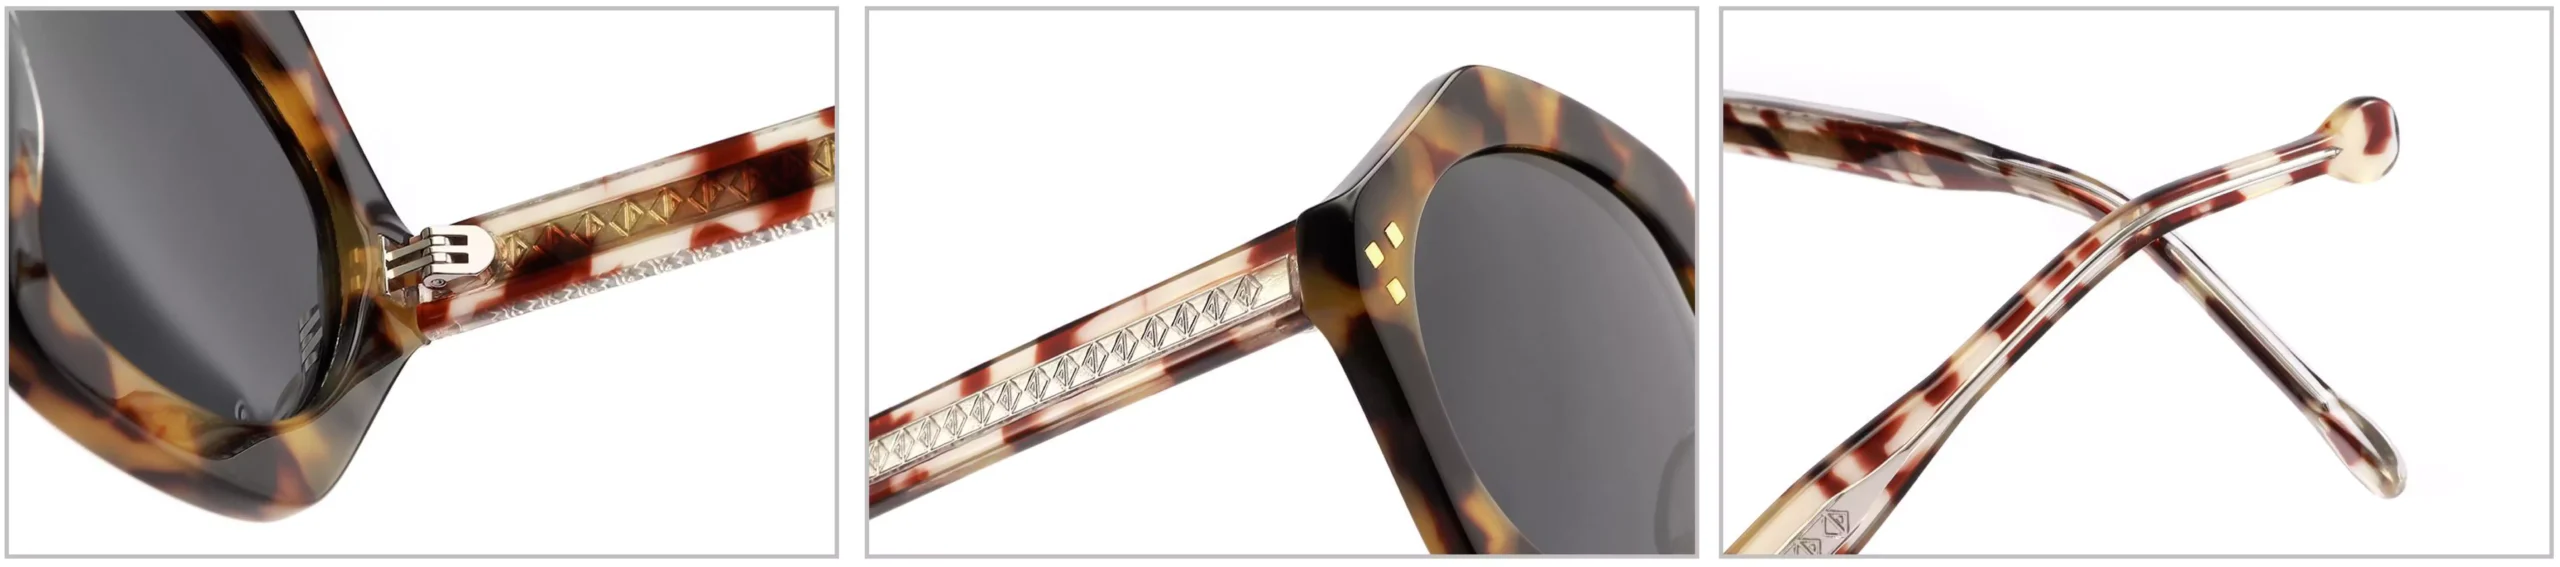 Sunglasses YD1203T Detail Shooting, include temple, temple tips, hinge, endpieces, wire cores, rivets